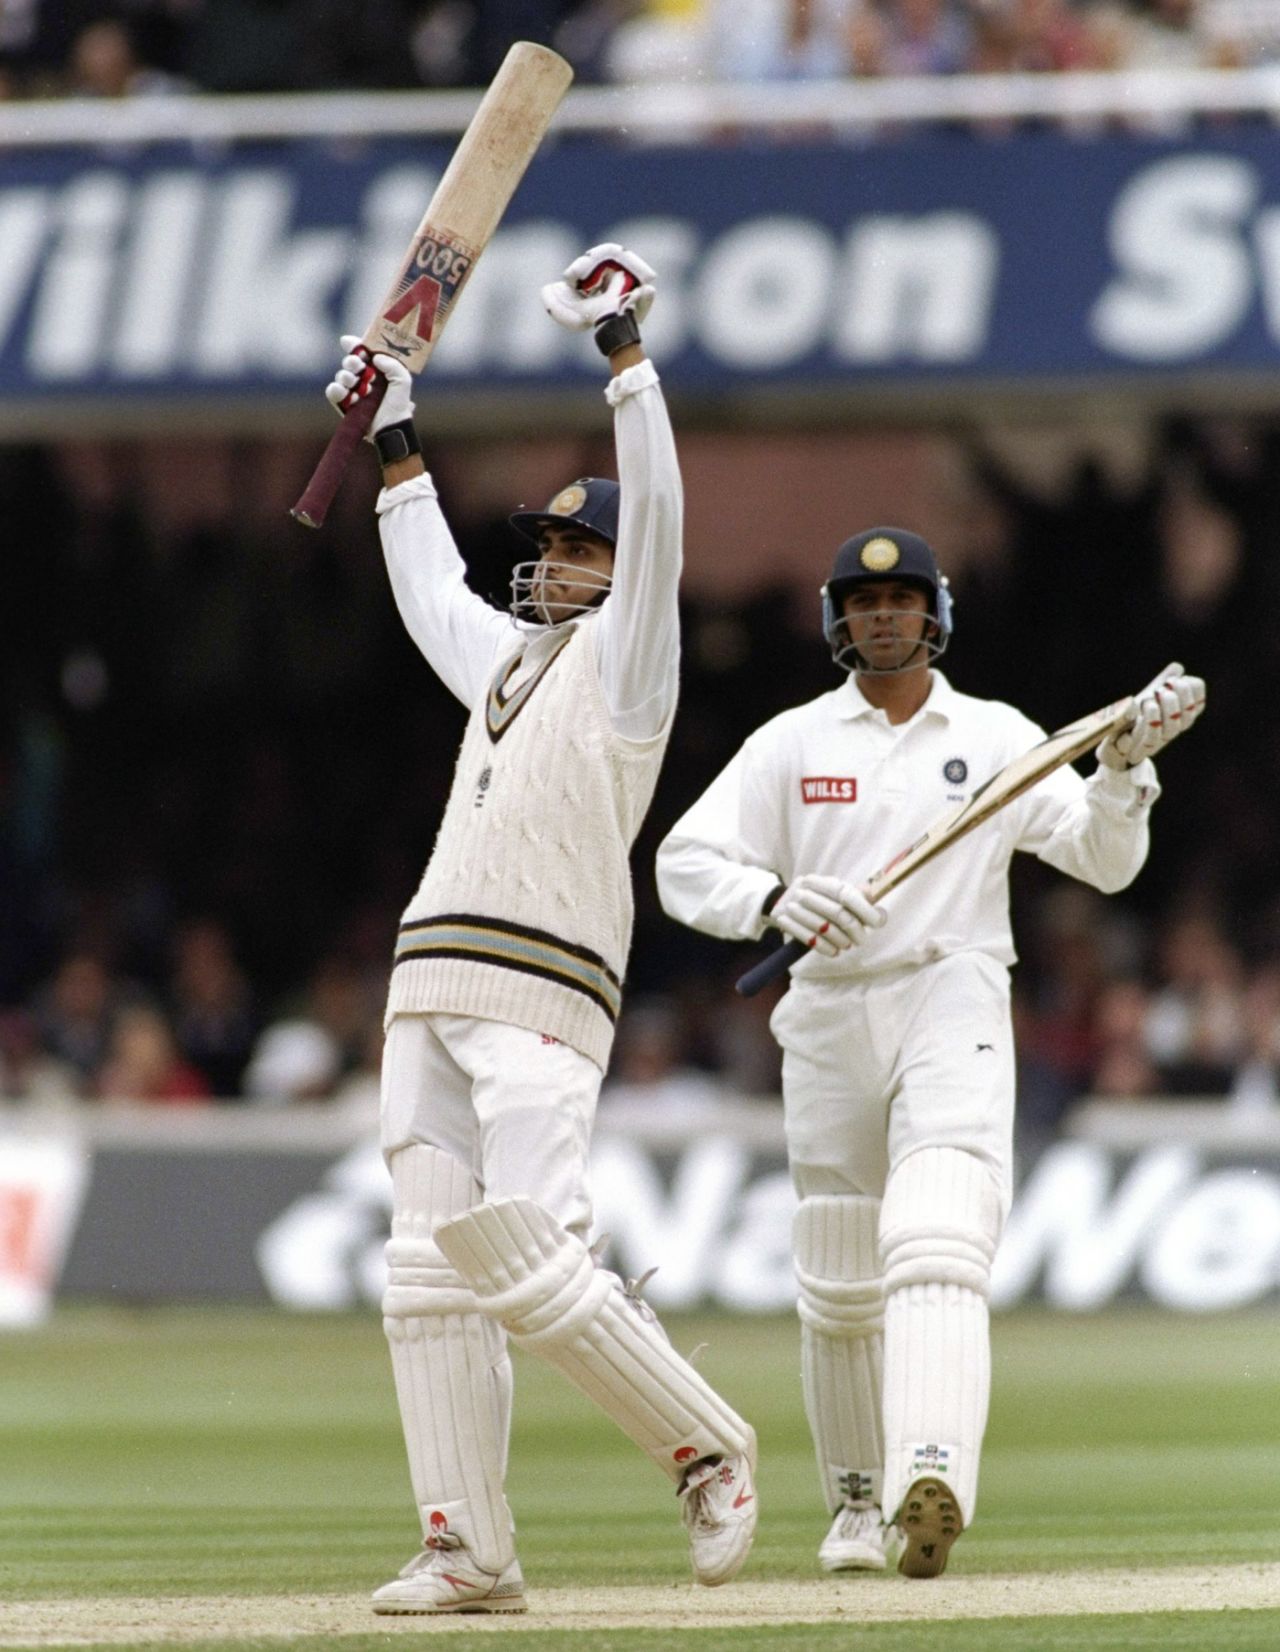 Sourav Ganguly celebrates a century on Test debut as Rahul Dravid applauds, England v India, 2nd Test, Lord's, 3rd day, June 22, 1996